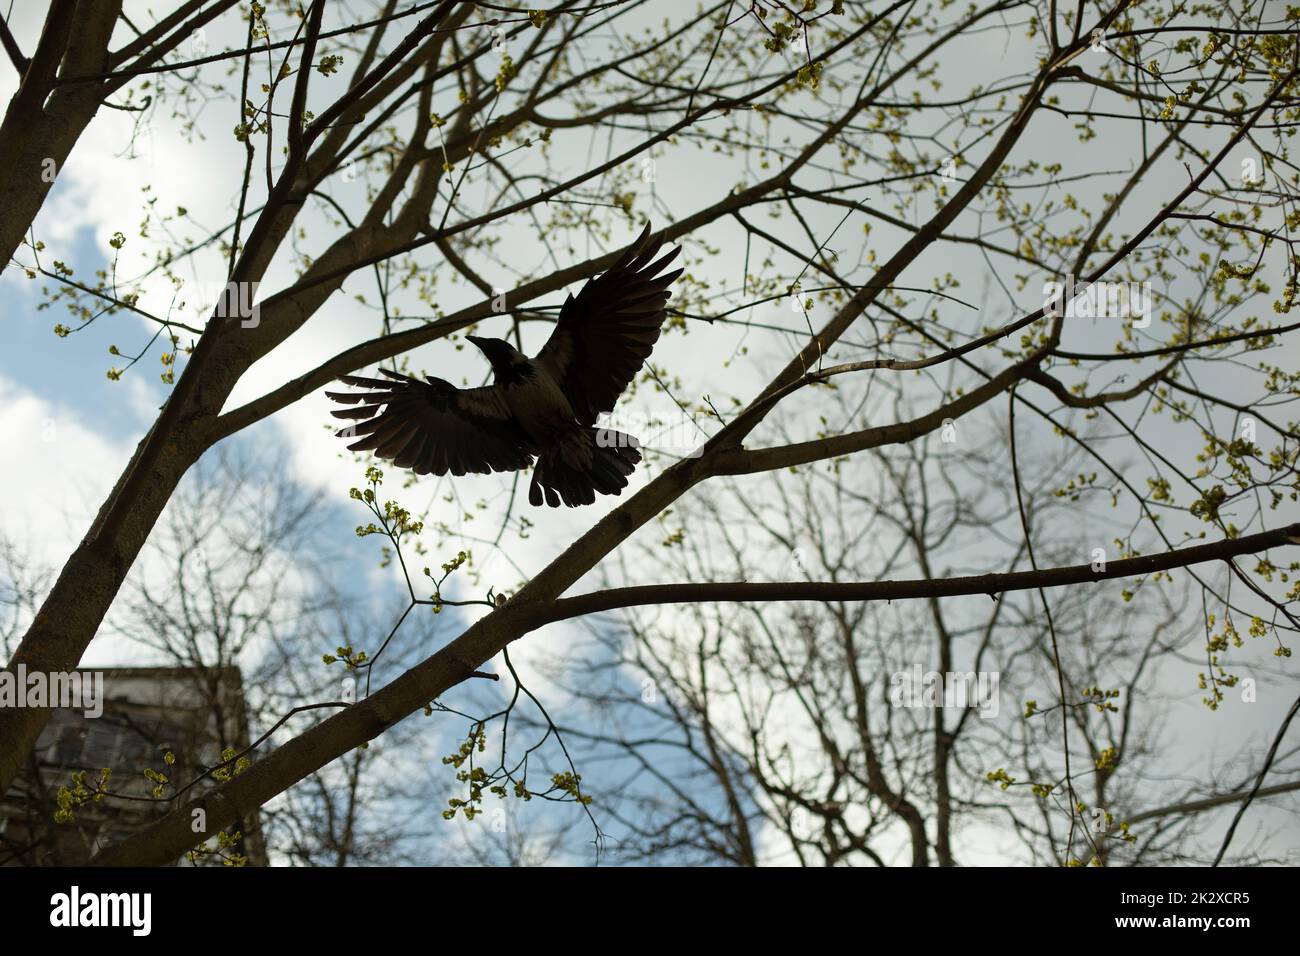 Black raven with large wings. Flight of crow among branches of tree. Bird in sky. Stock Photo